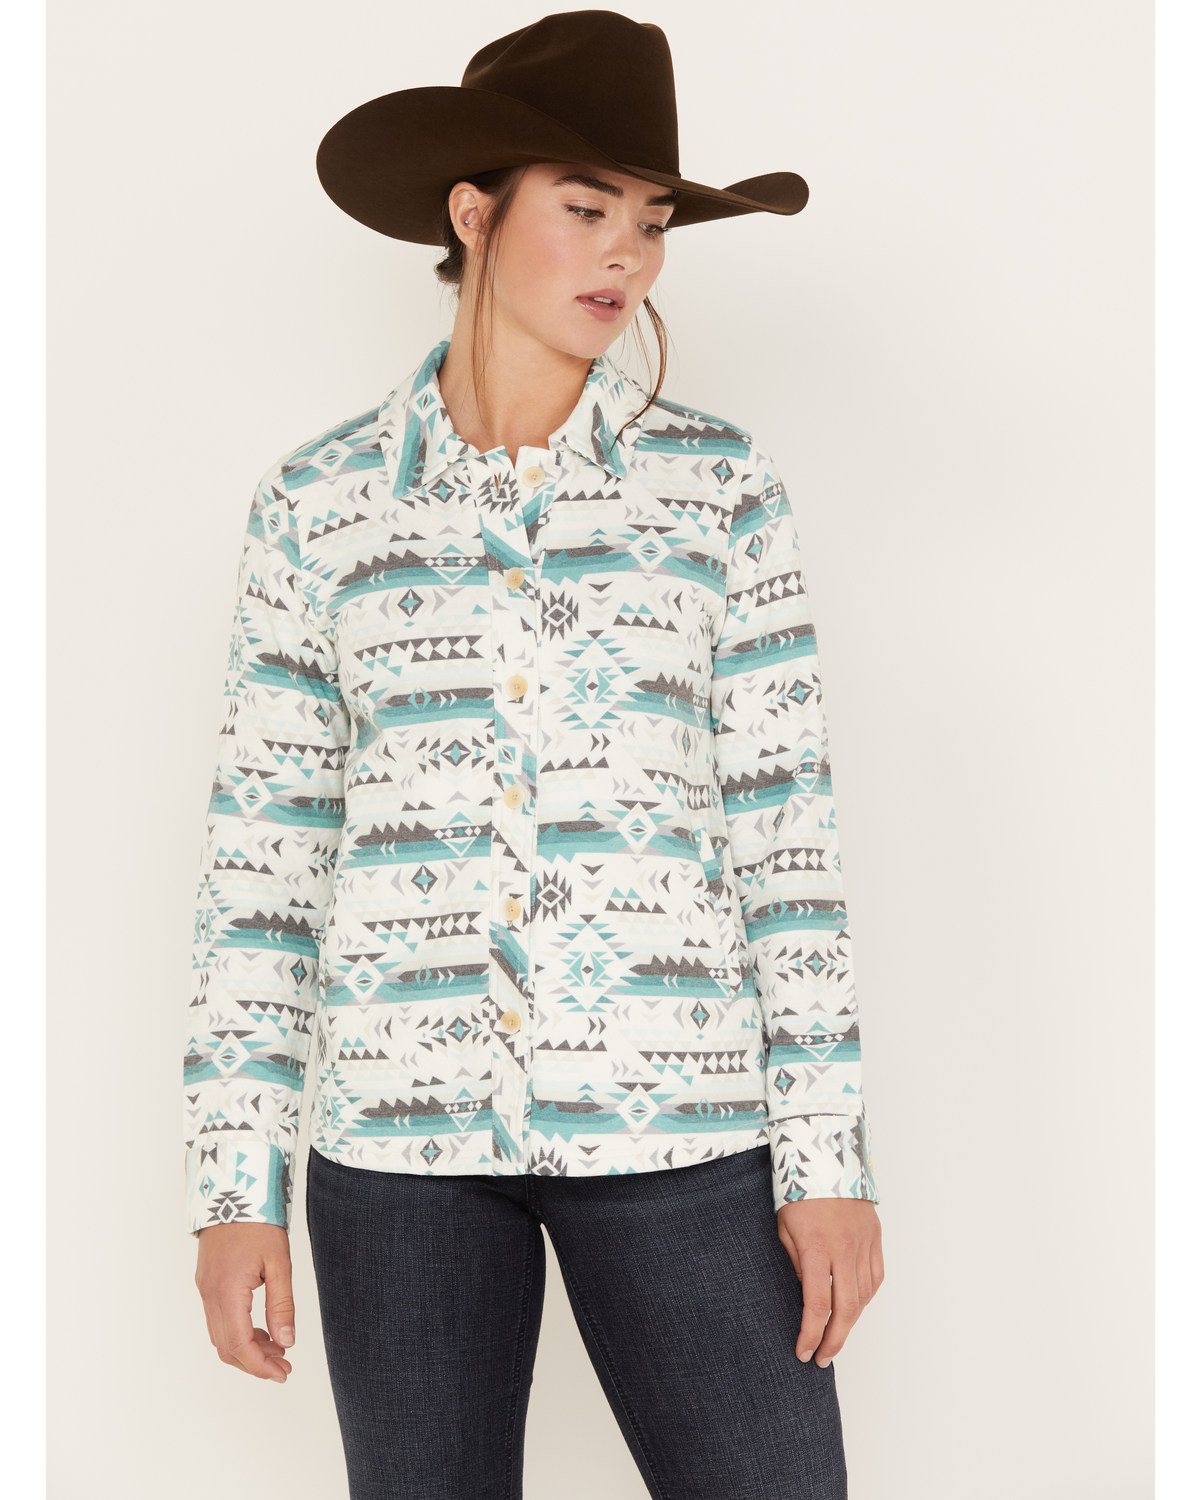 RANK 45® Women's Southwestern Print Quilted Shacket